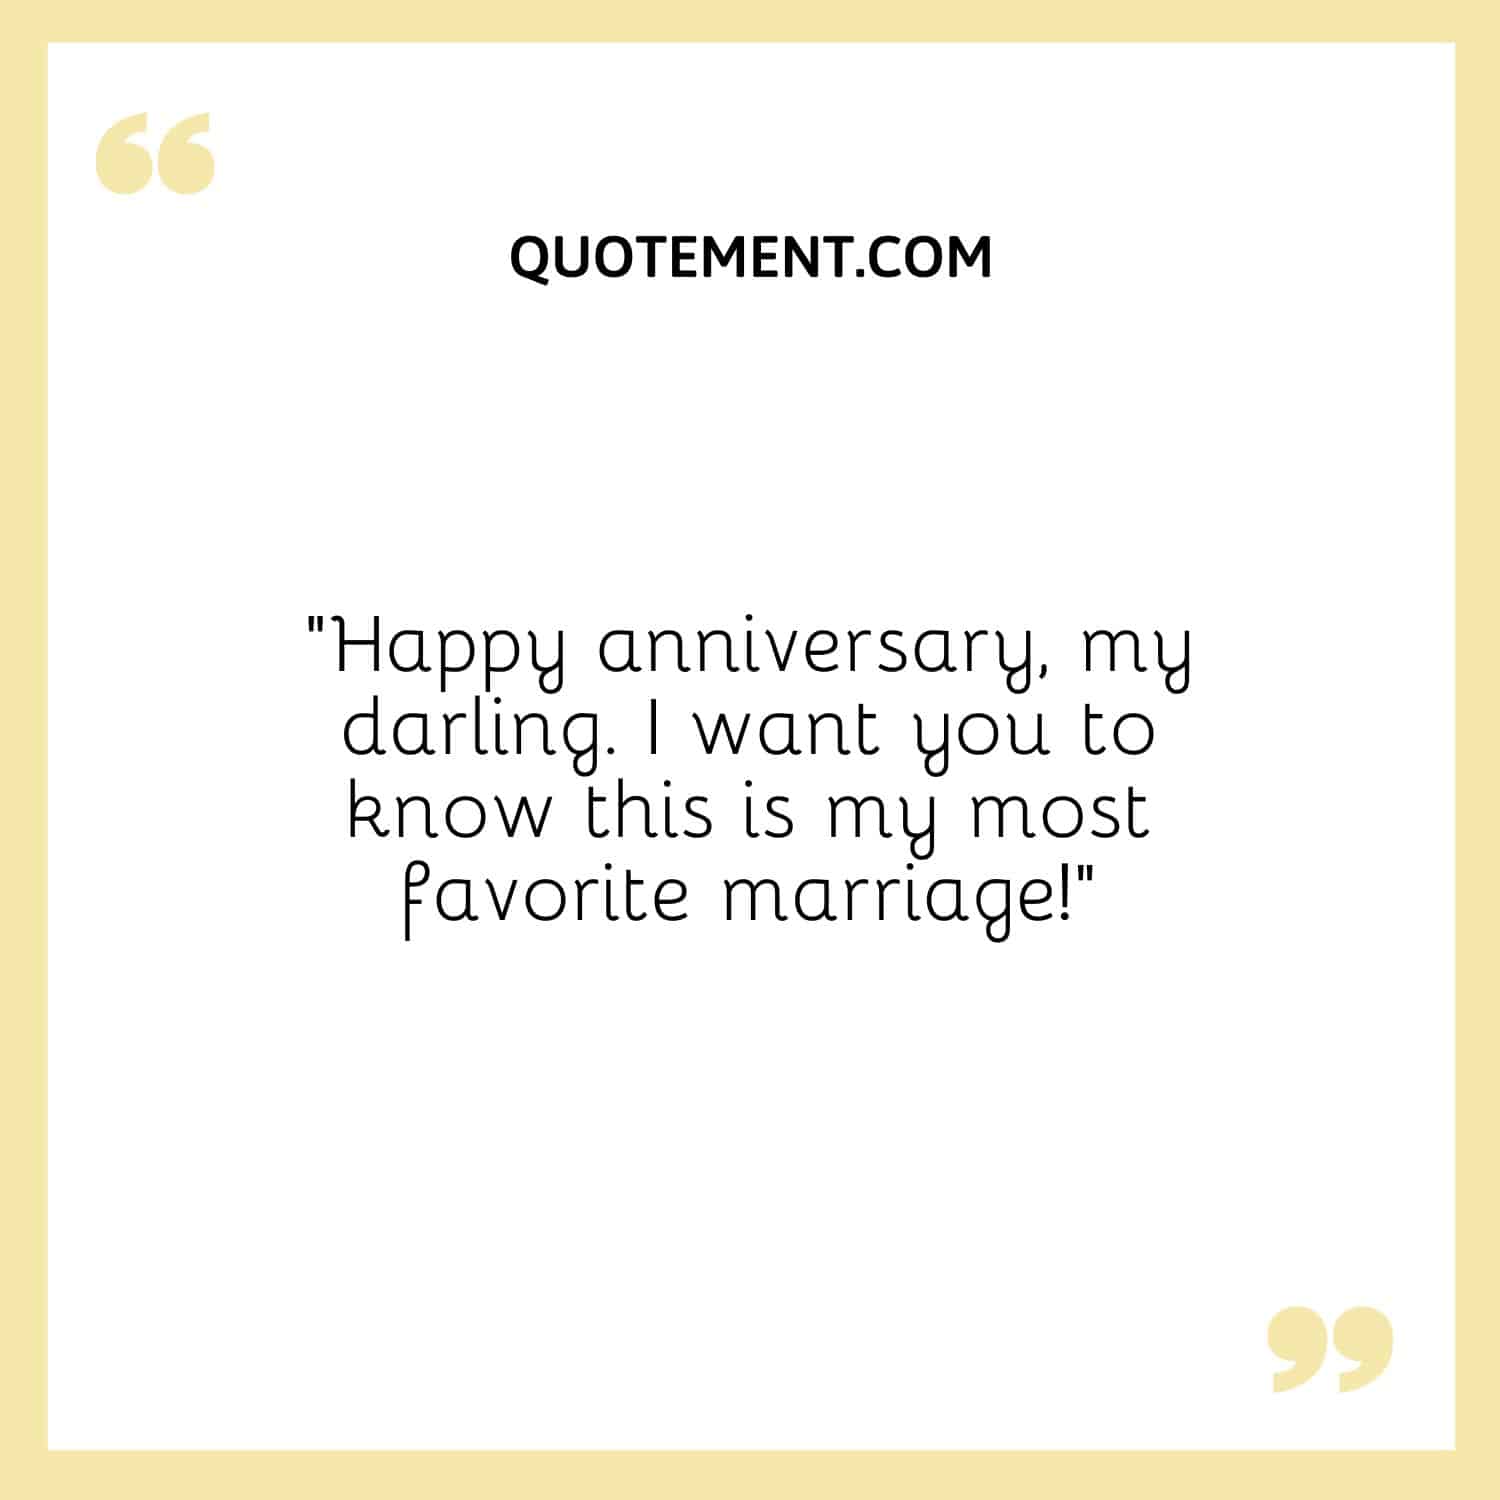 “Happy anniversary, my darling. I want you to know this is my most favorite marriage!”